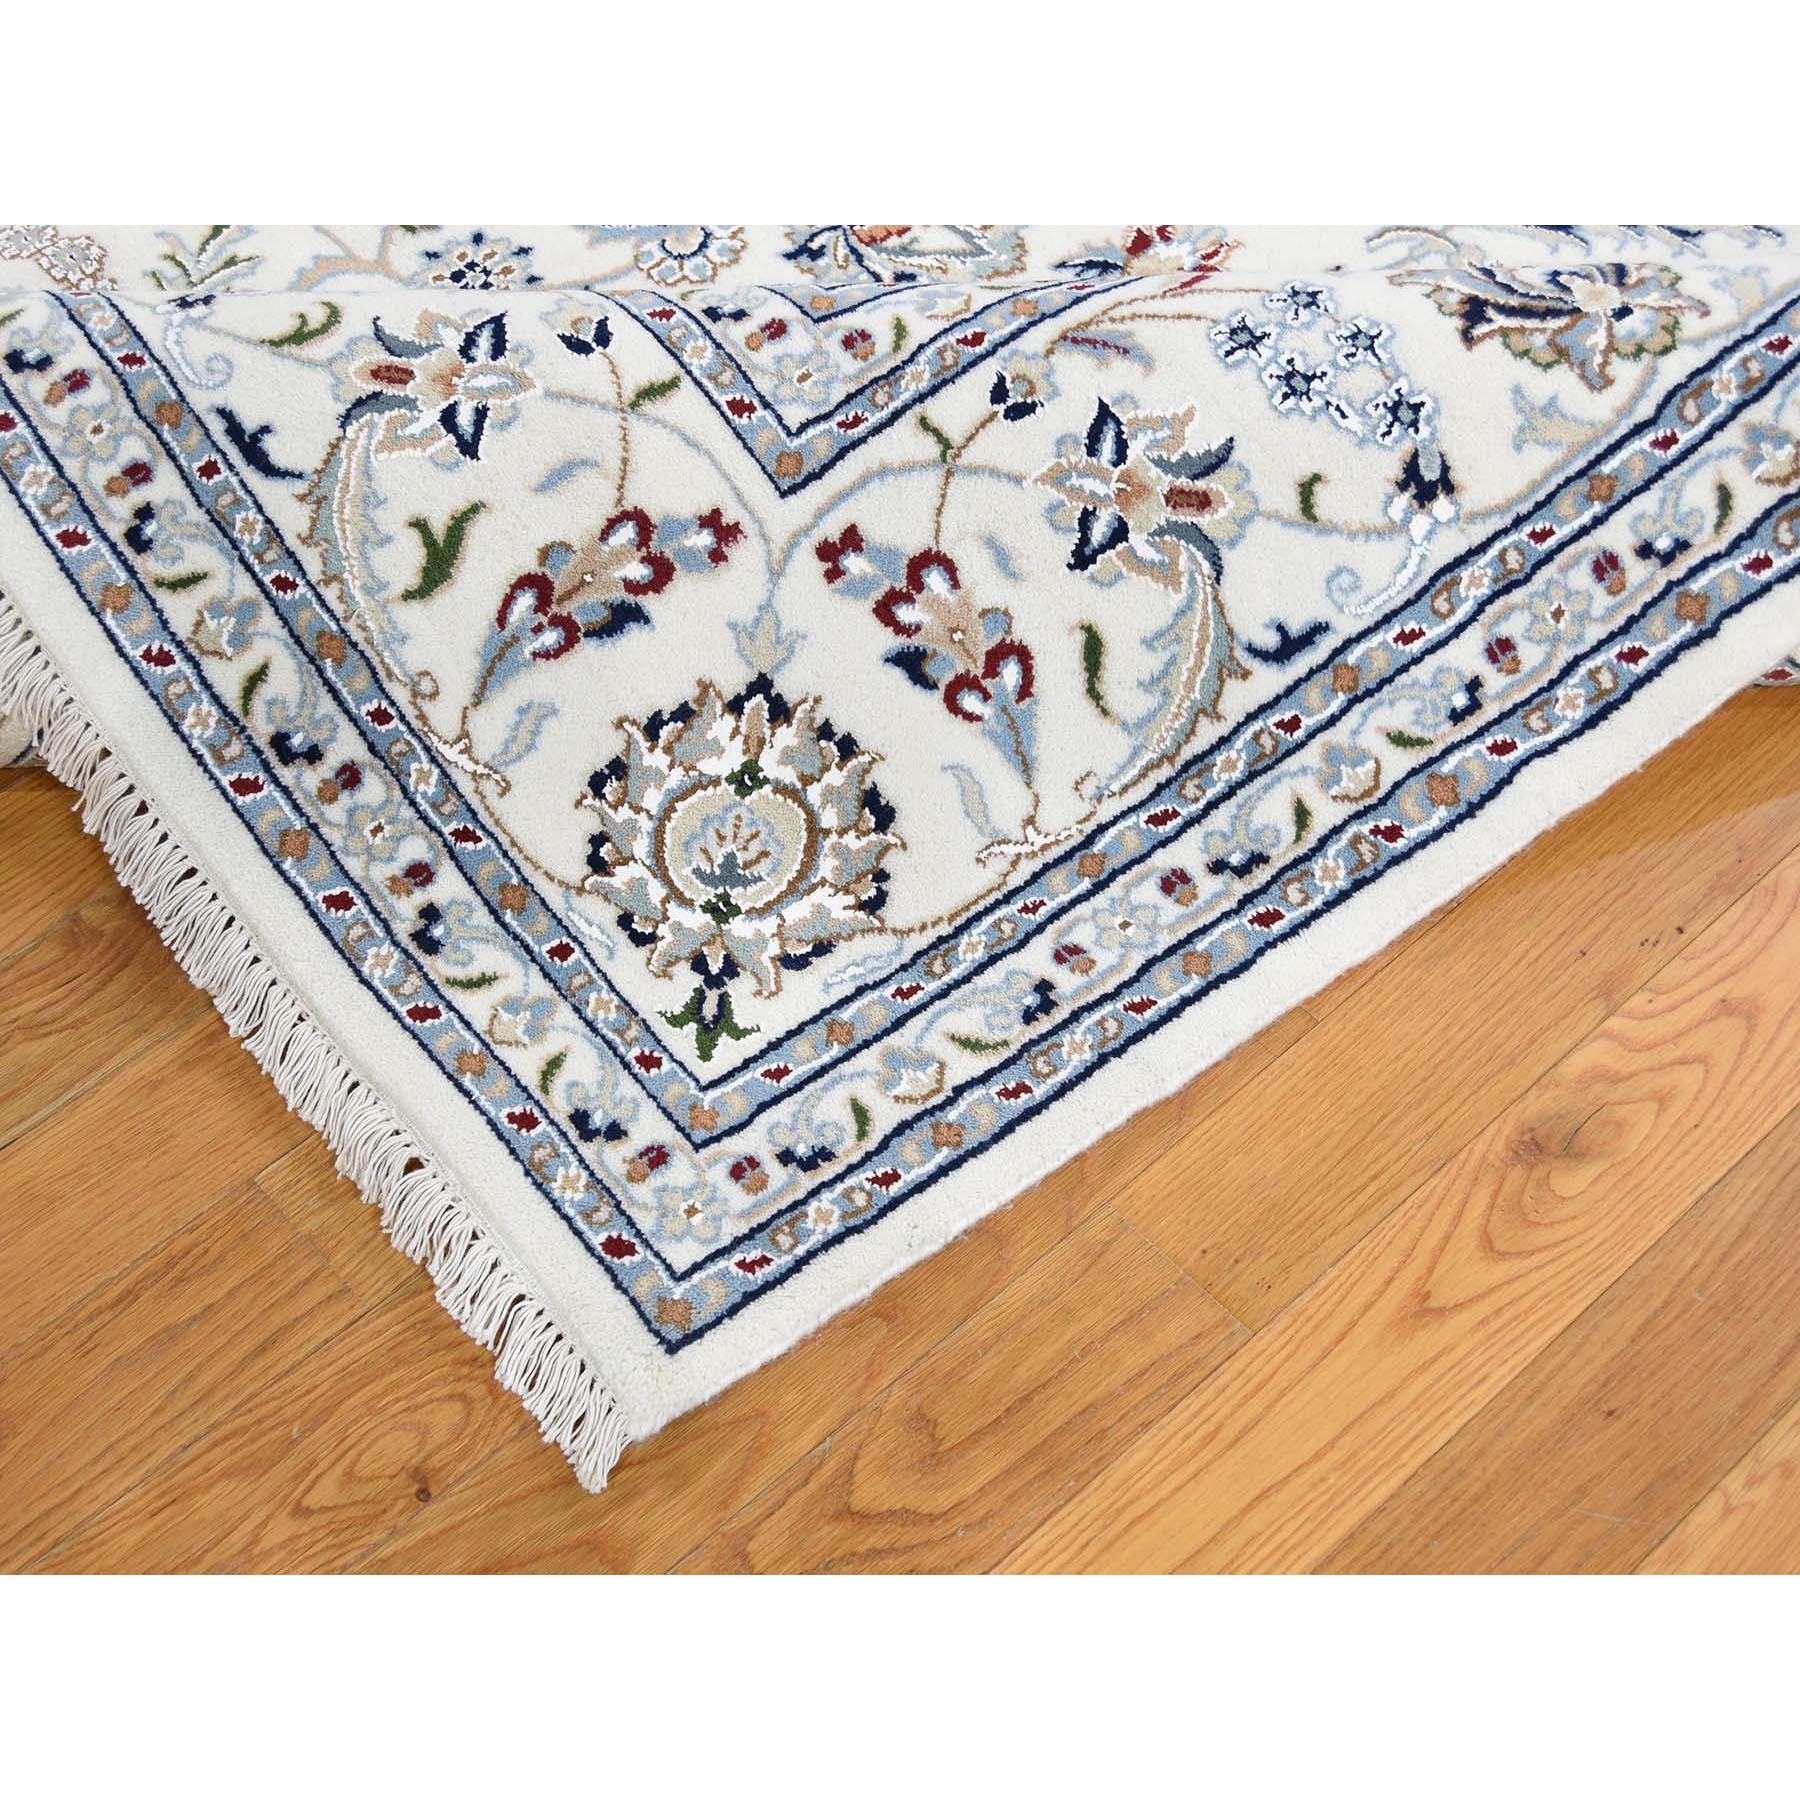 7-9 x10- Wool And Silk 250 KPSI Ivory Nain Hand-Knotted Oriental Rug 